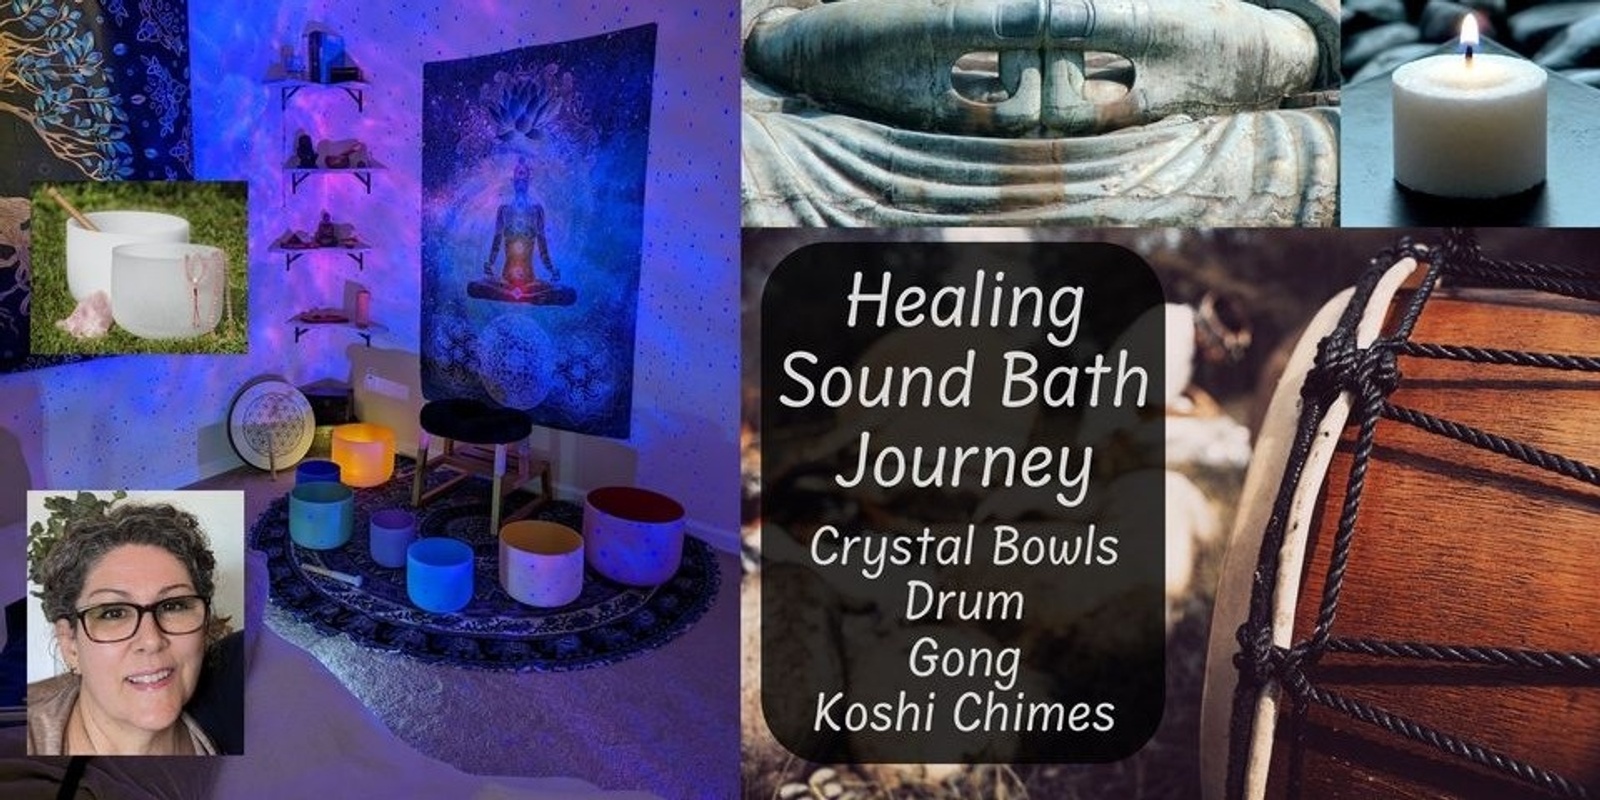 Healing Sound Bath Journey After the MeWe Fair in Lynnwood